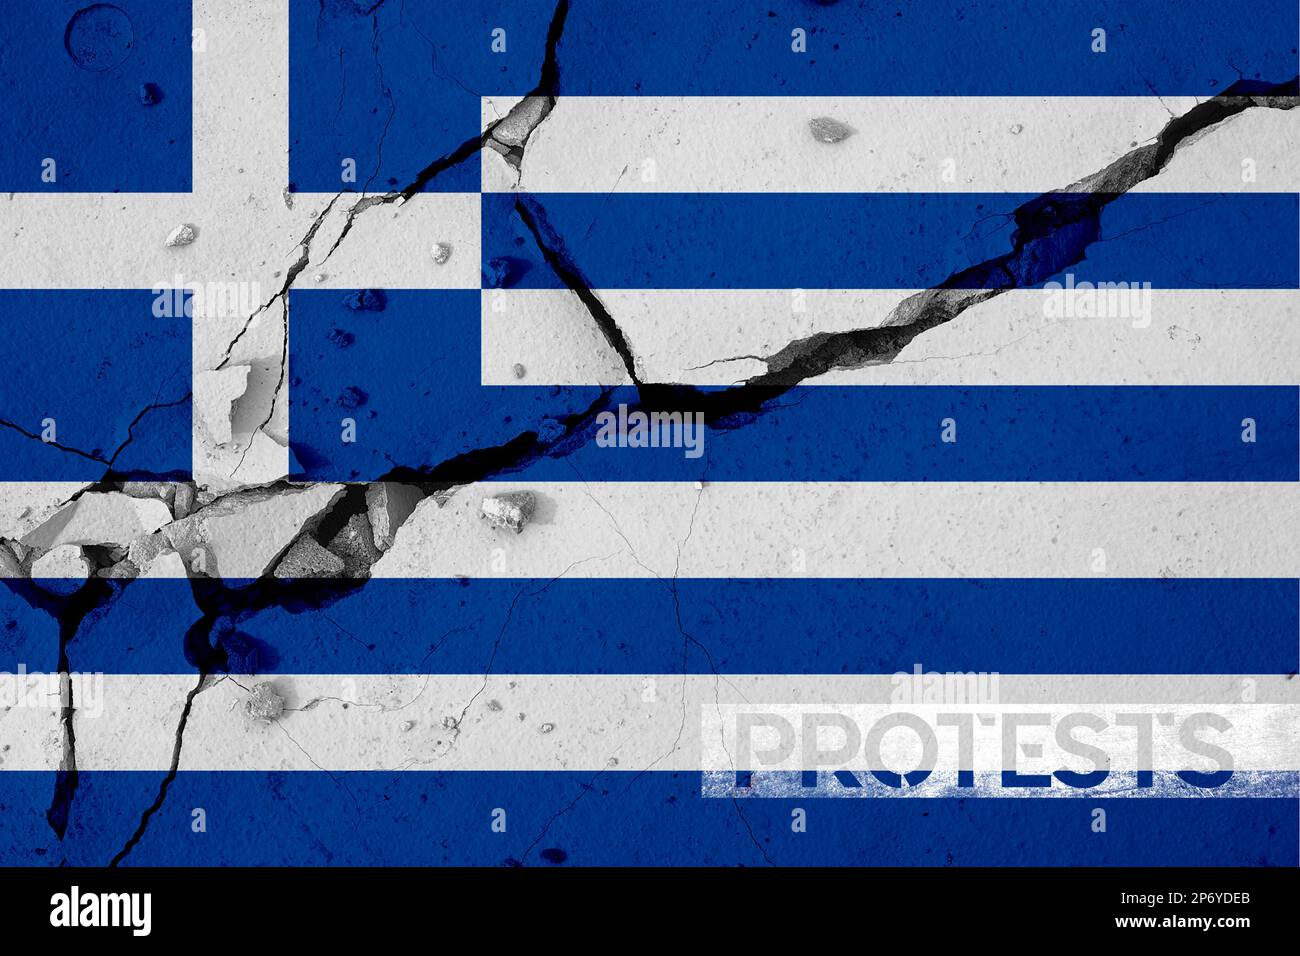 Protest in Greece. Rally in Greece. Greece flag concept protest banner Stock Photo